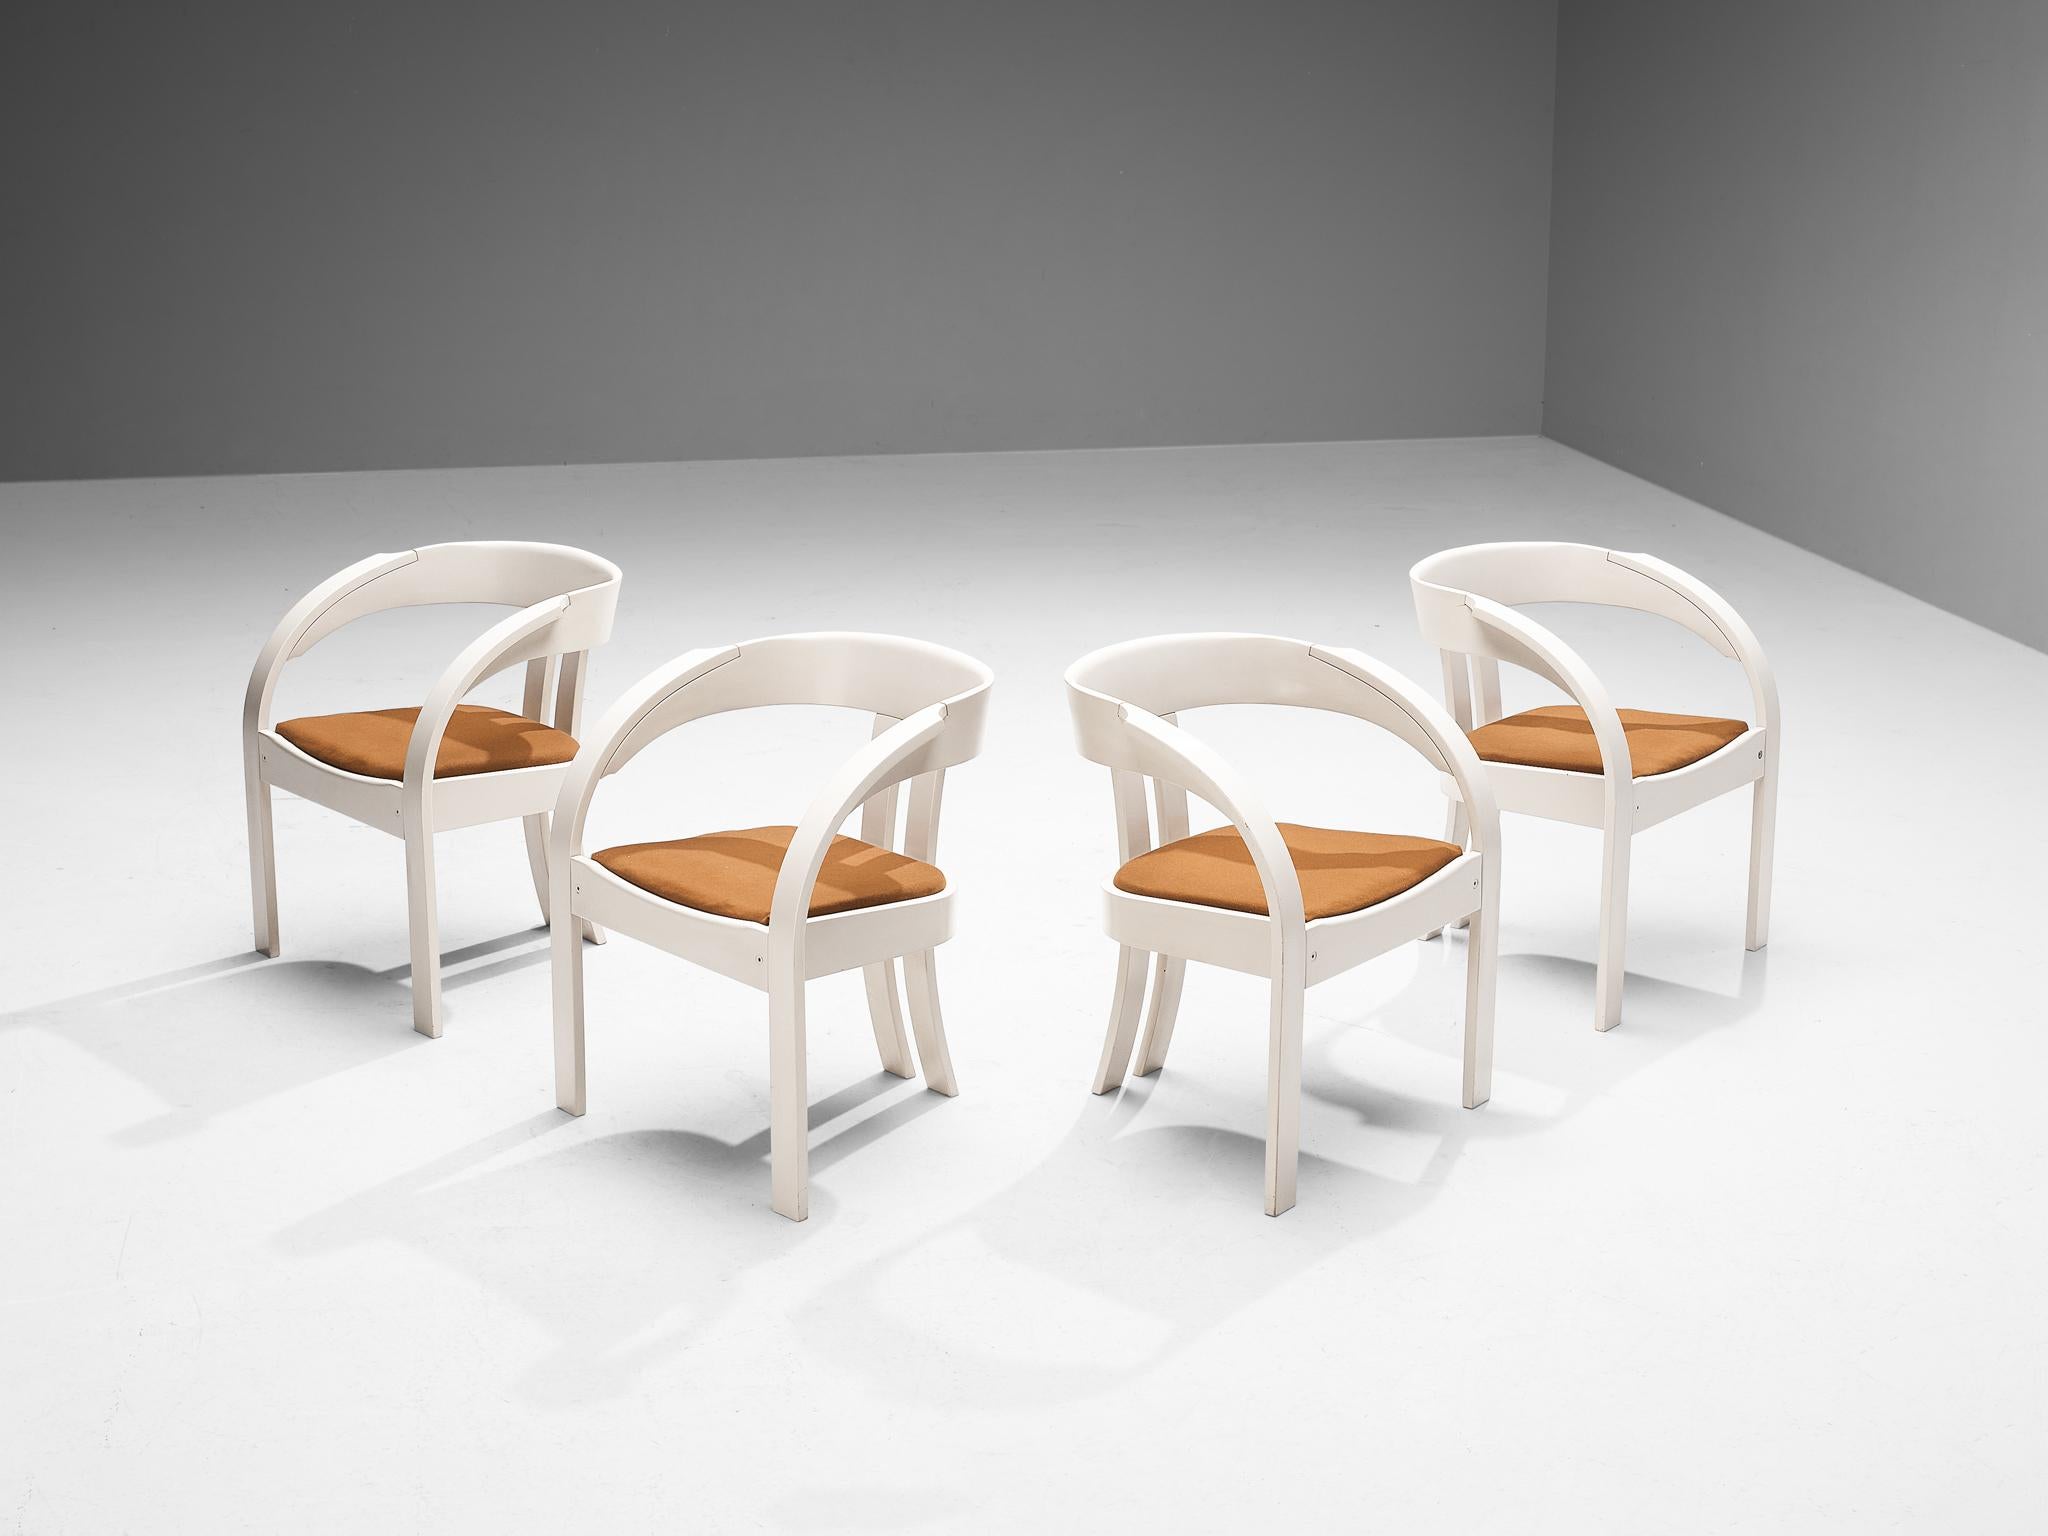 Giovanni Battista Bassi for Poltronova, set of four armchairs model 'Elisa', fabric, lacquered wood, Italy, 1960s 

These wonderfully constructed chairs are based on a solid construction where clear, fluent lines are allowed to emerge in the design.